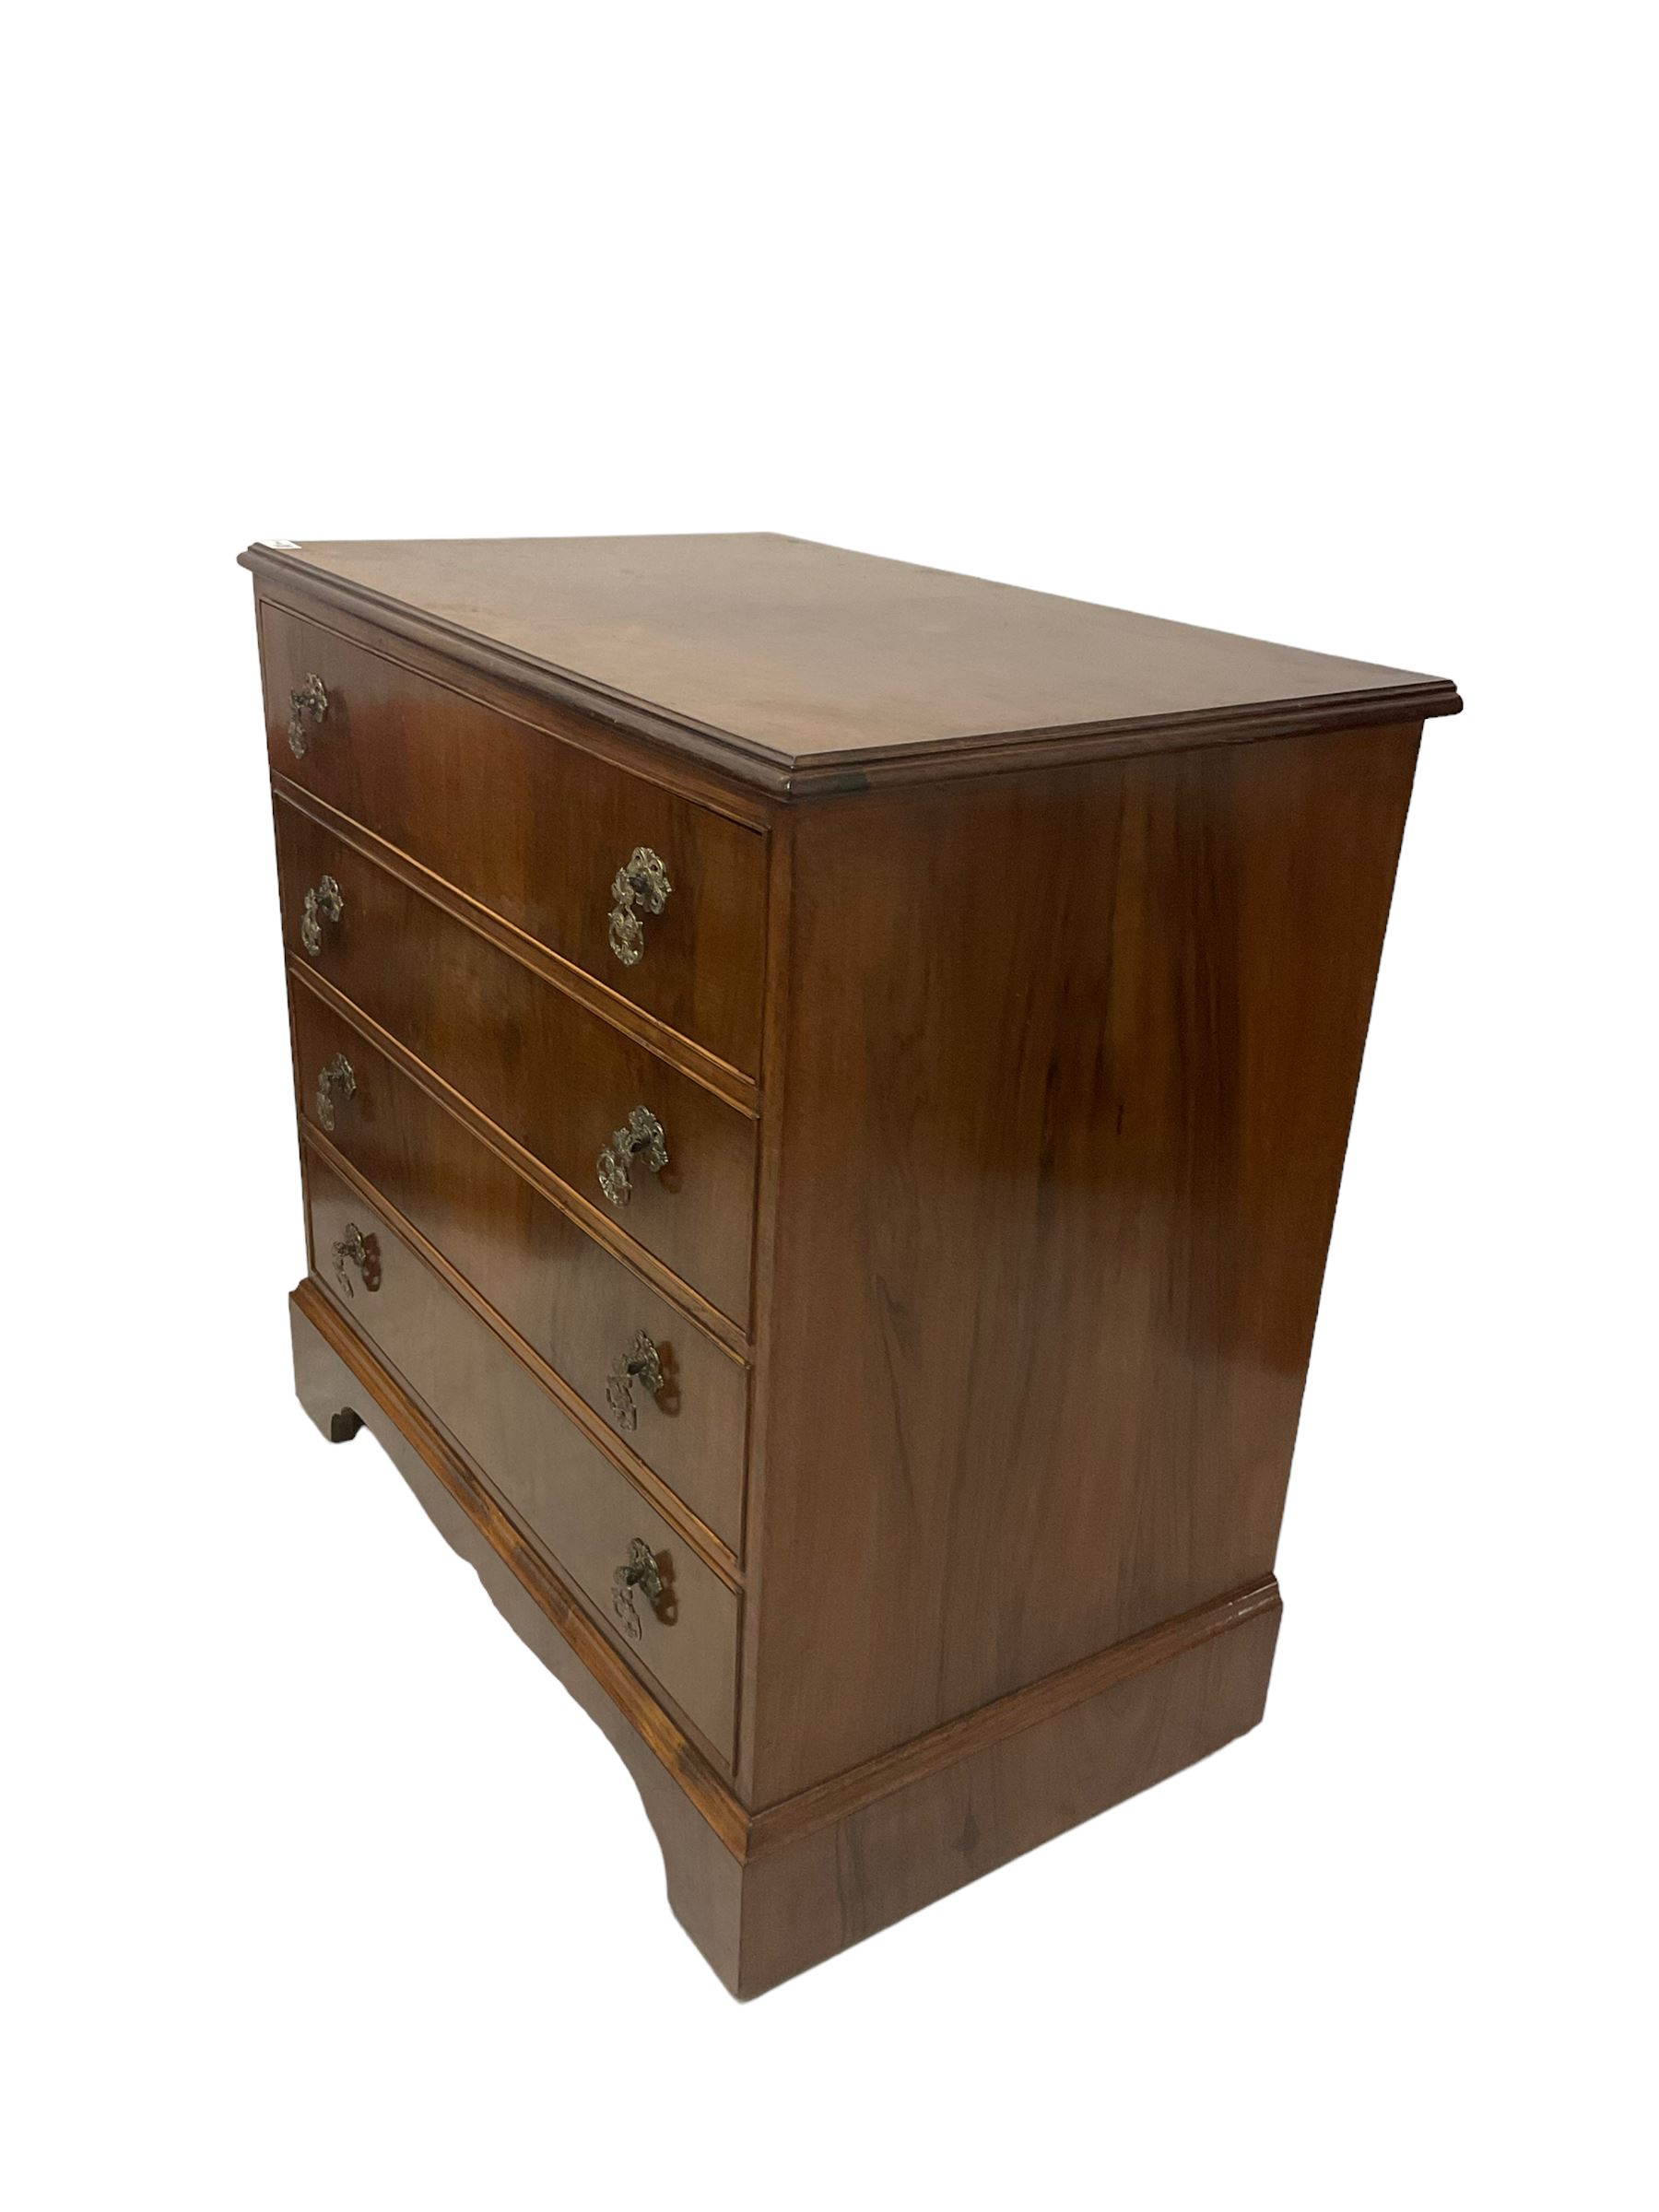 Mid-20th century walnut four drawer chest - Image 2 of 3